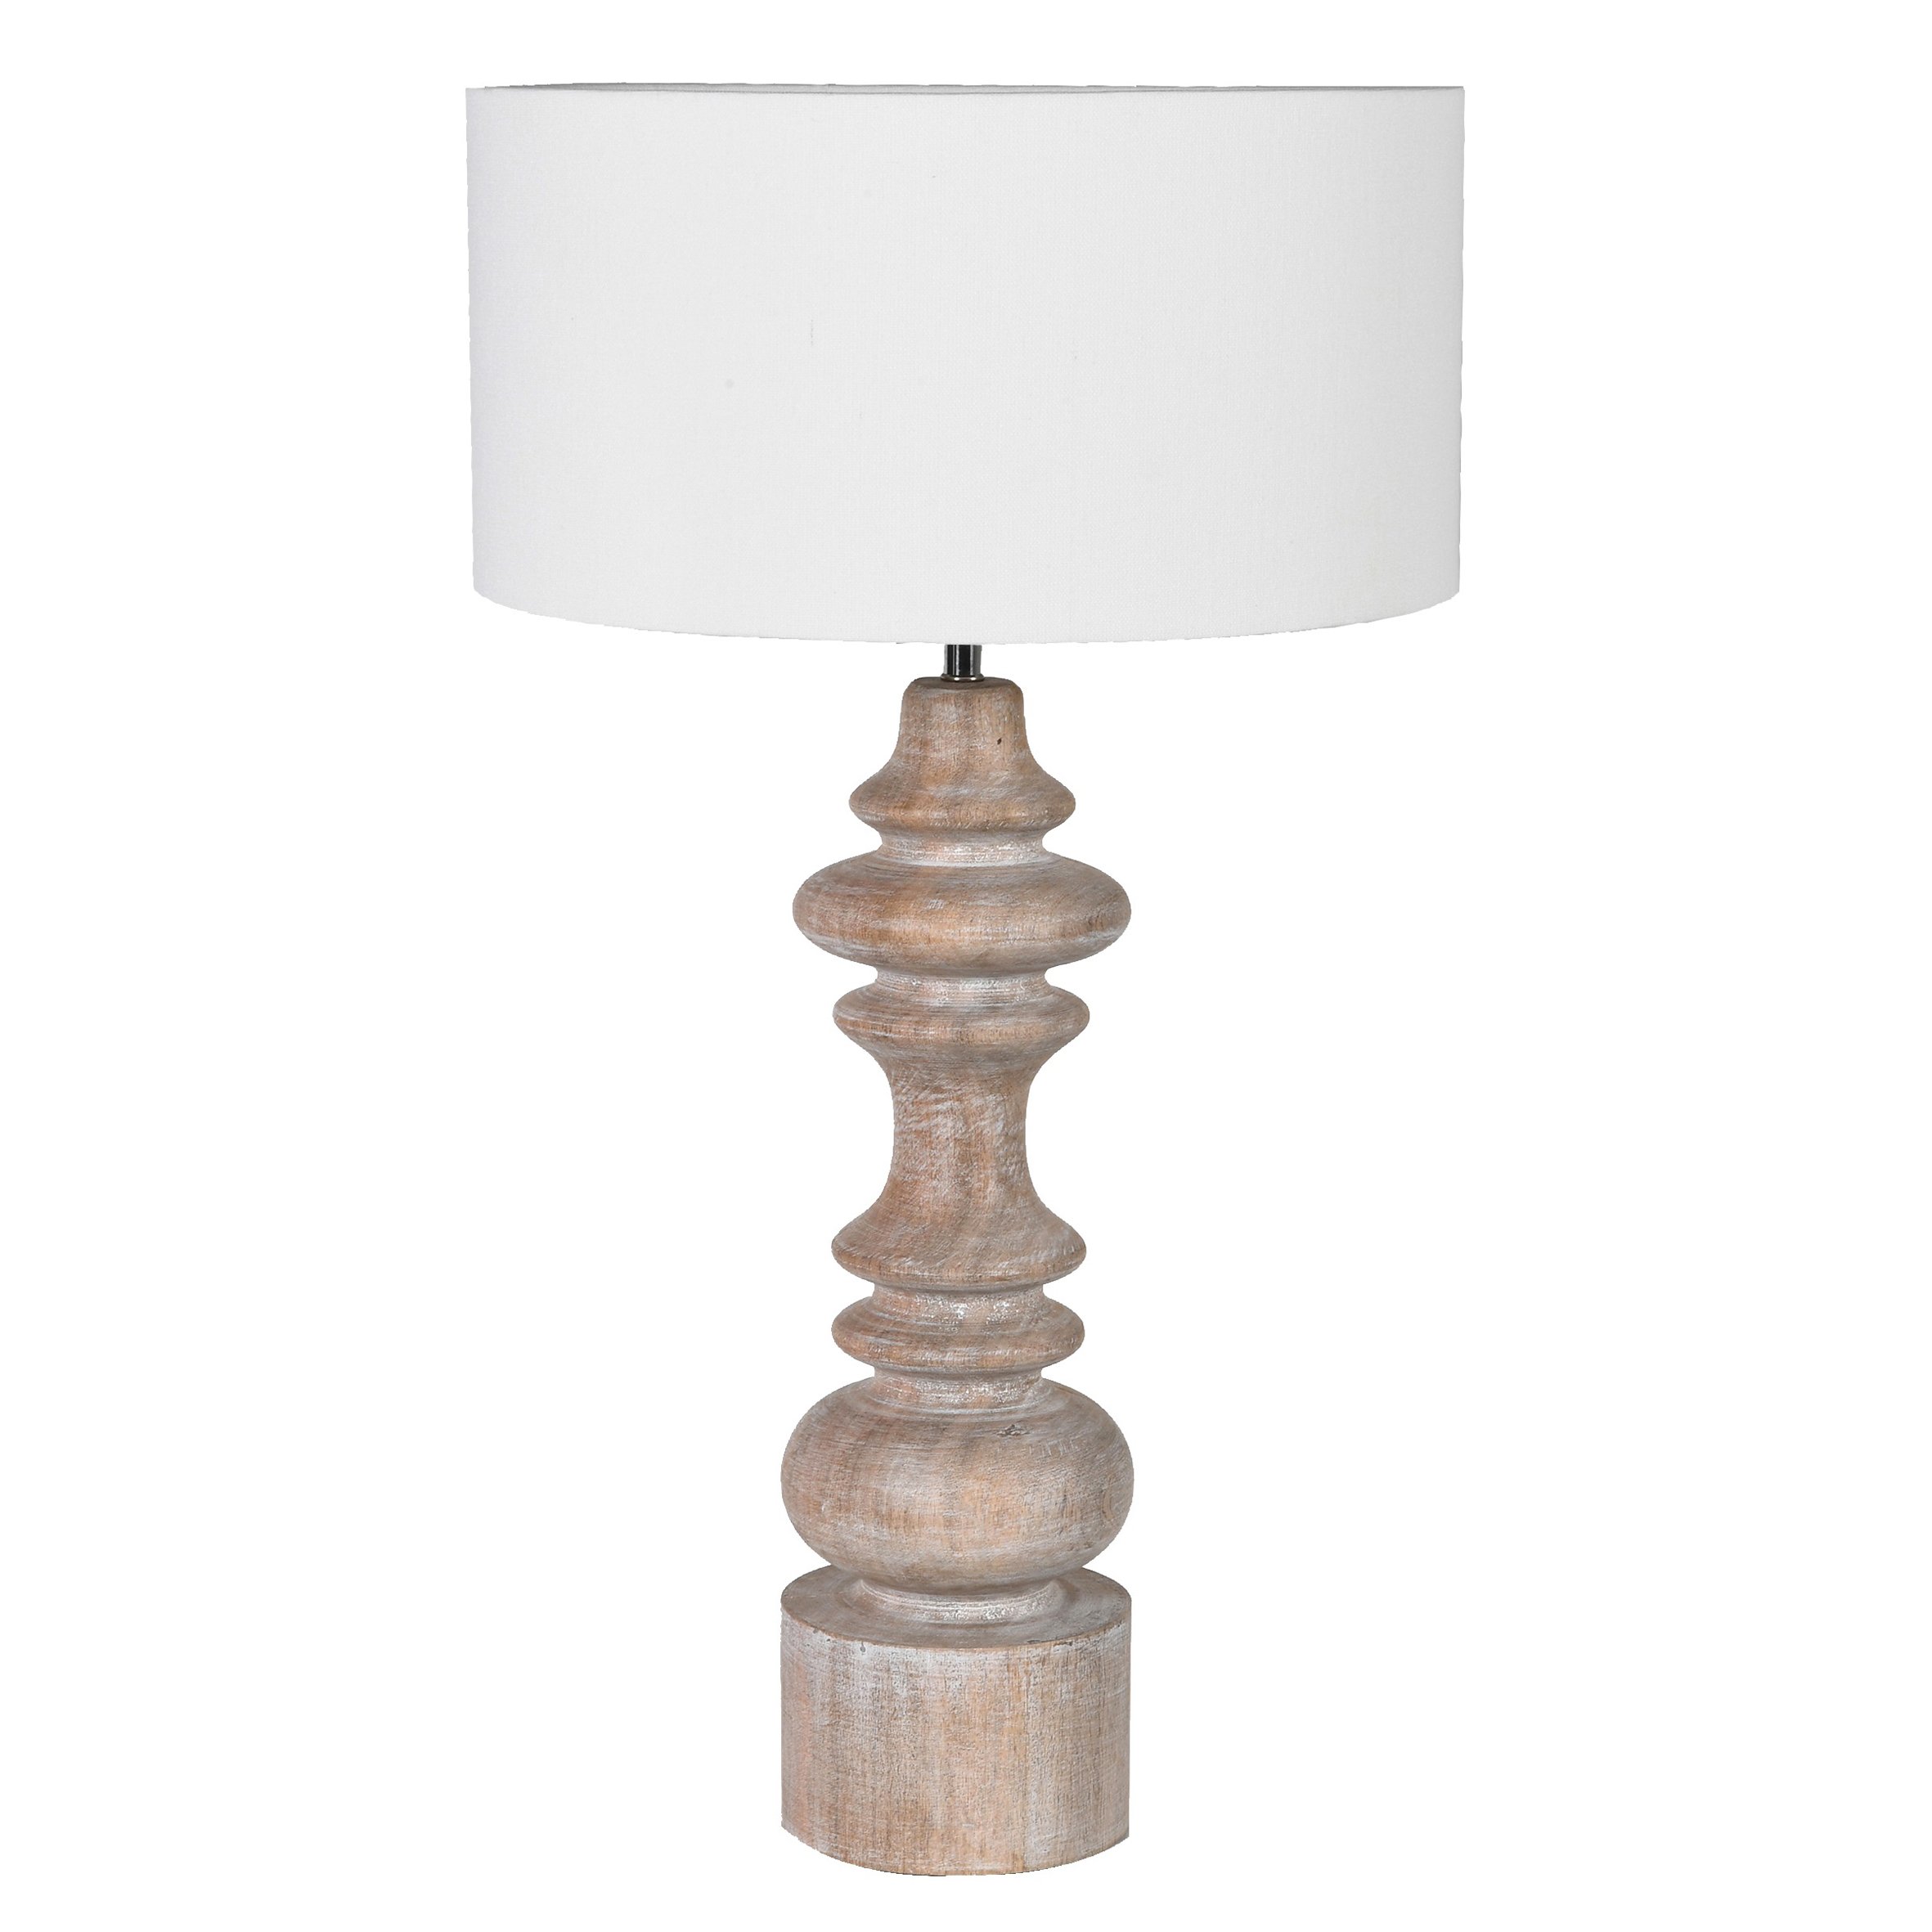 Sculpted Wooden Table Lamp, White | Barker & Stonehouse